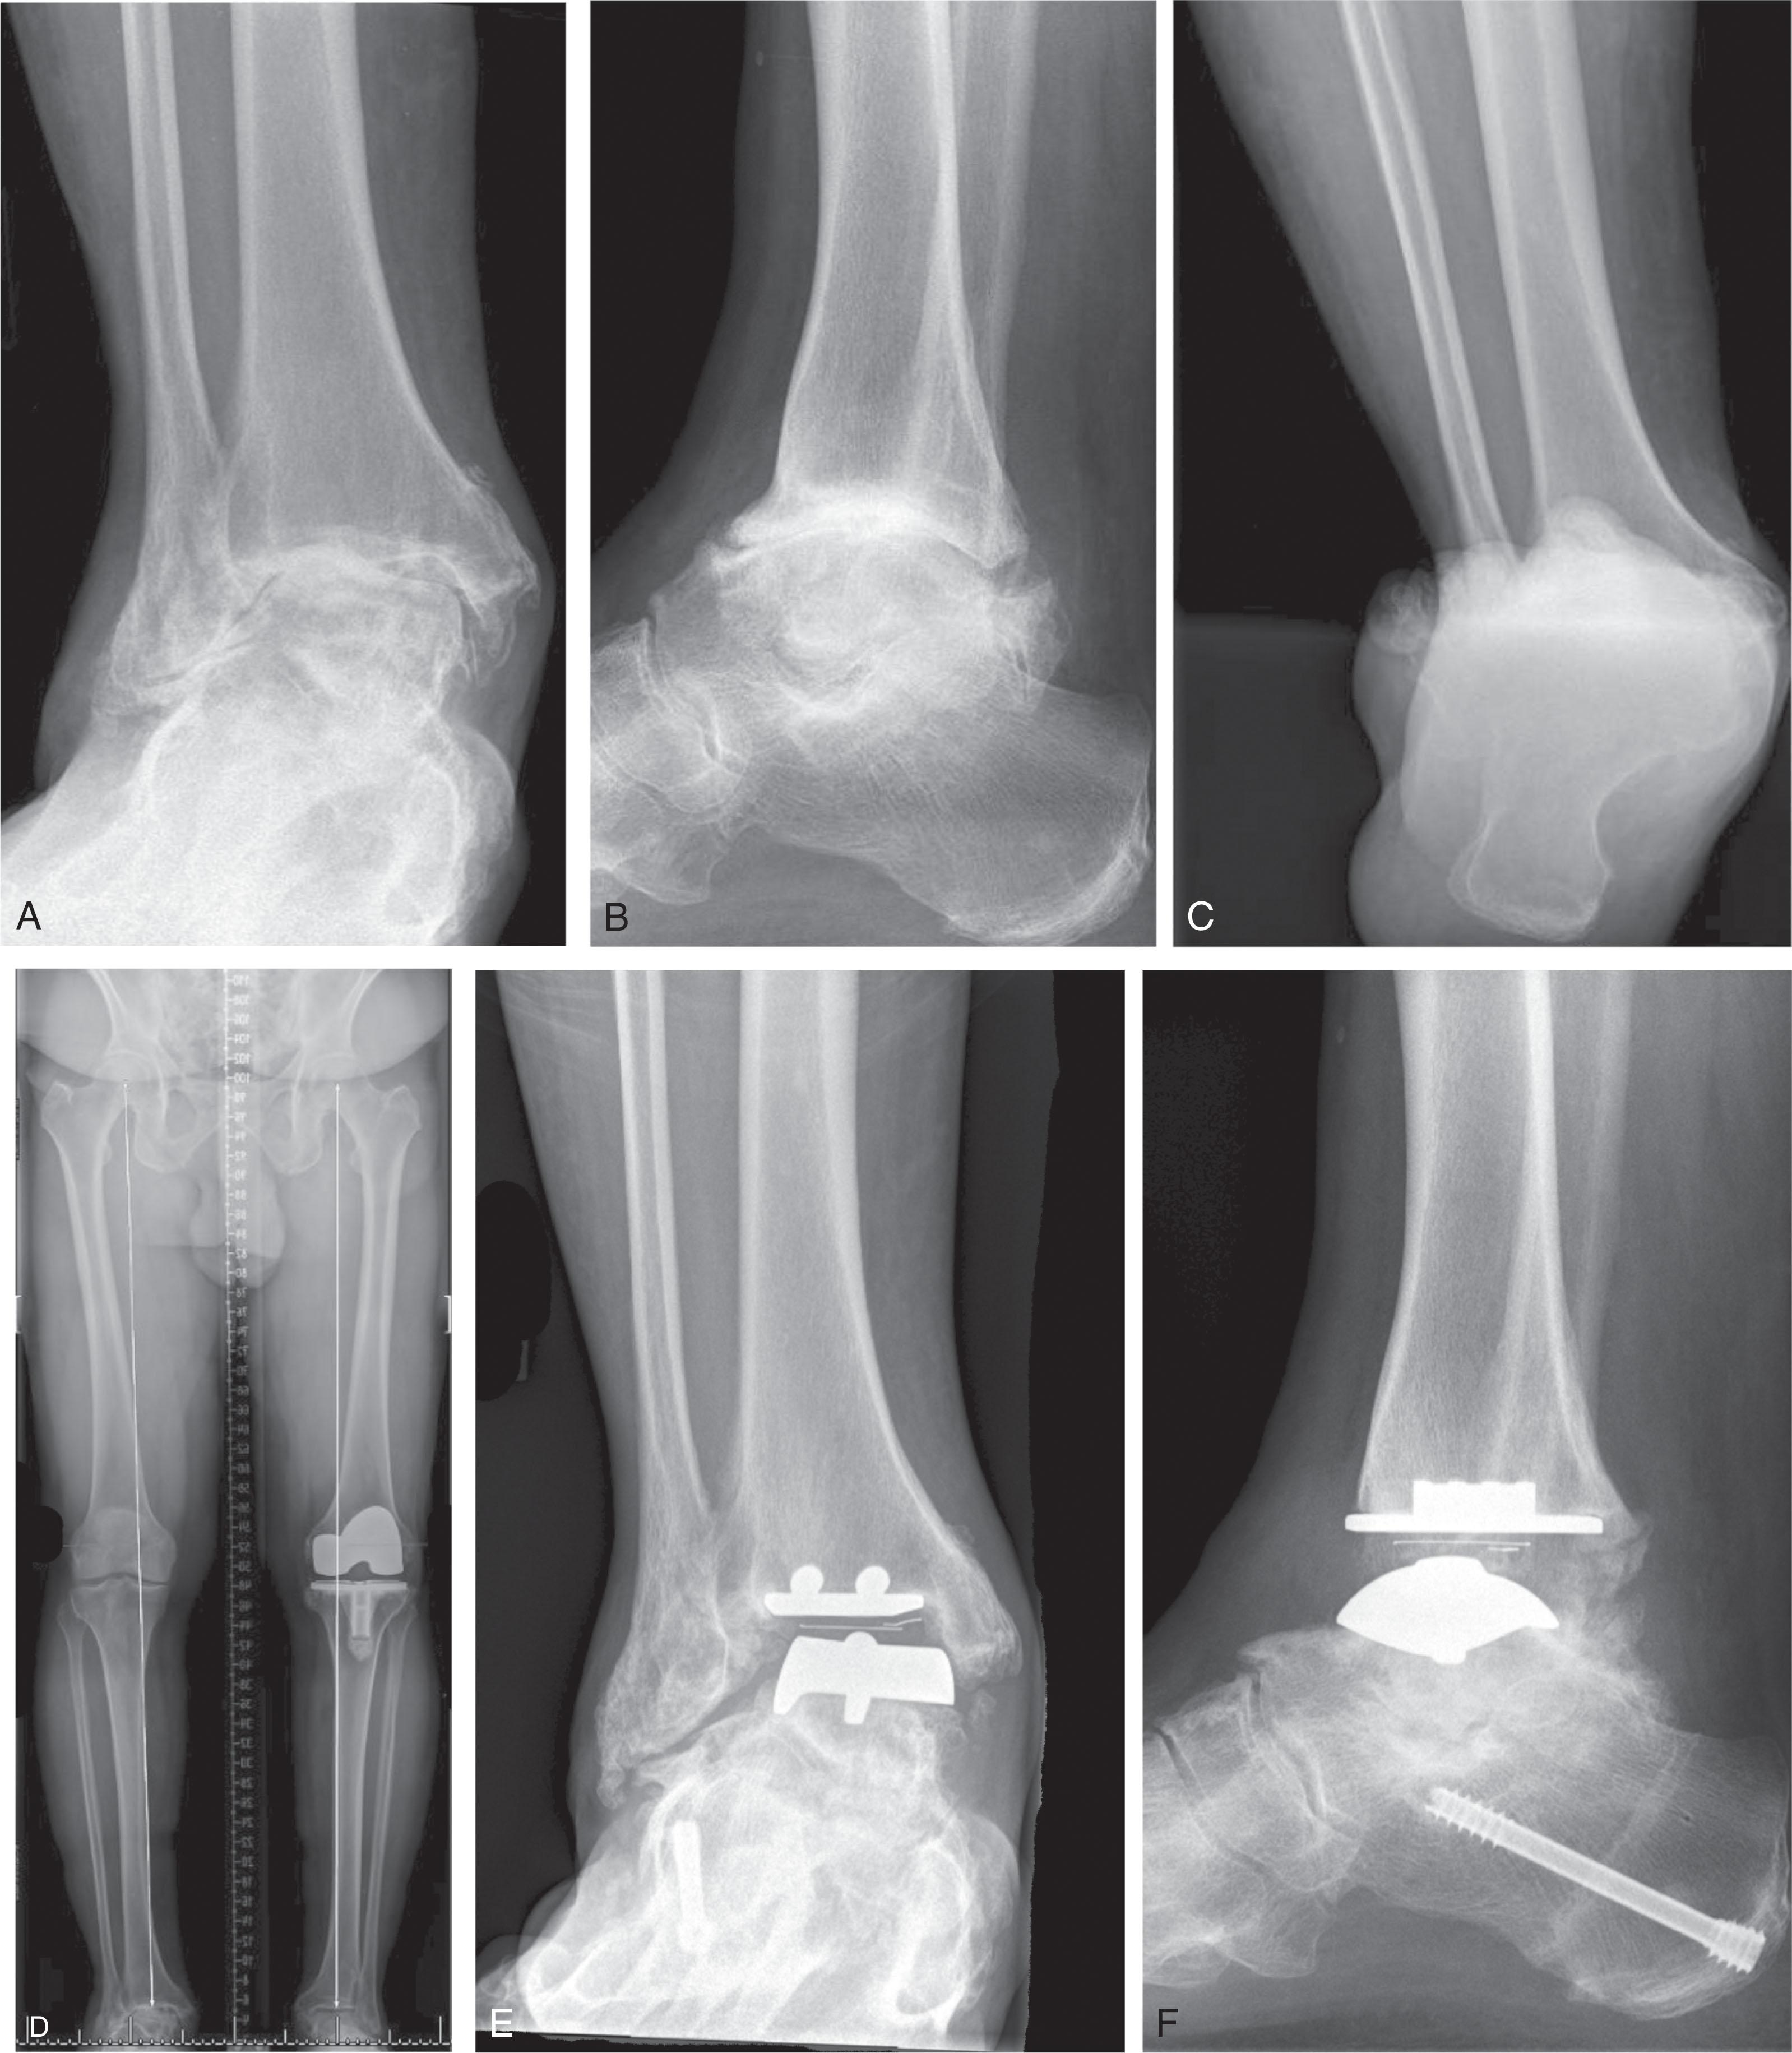 Fig. 23-16, Ankle malalignment related to planovalgus deformity. A and B , Anteroposterior and lateral radiographs of an arthritic ankle with valgus-incongruent coronal plane deformity. The lateral talar dome is eroding into the tibial plafond. C , Heel alignment radiograph showing severe valgus hindfoot alignment relative to the tibial shaft. D , Long-leg alignment radiograph showing neutral lower extremity alignment. E and F , Two years after ankle replacement and medial slide calcaneal osteotomy, mild intracomponent instability, and edge loading is seen.